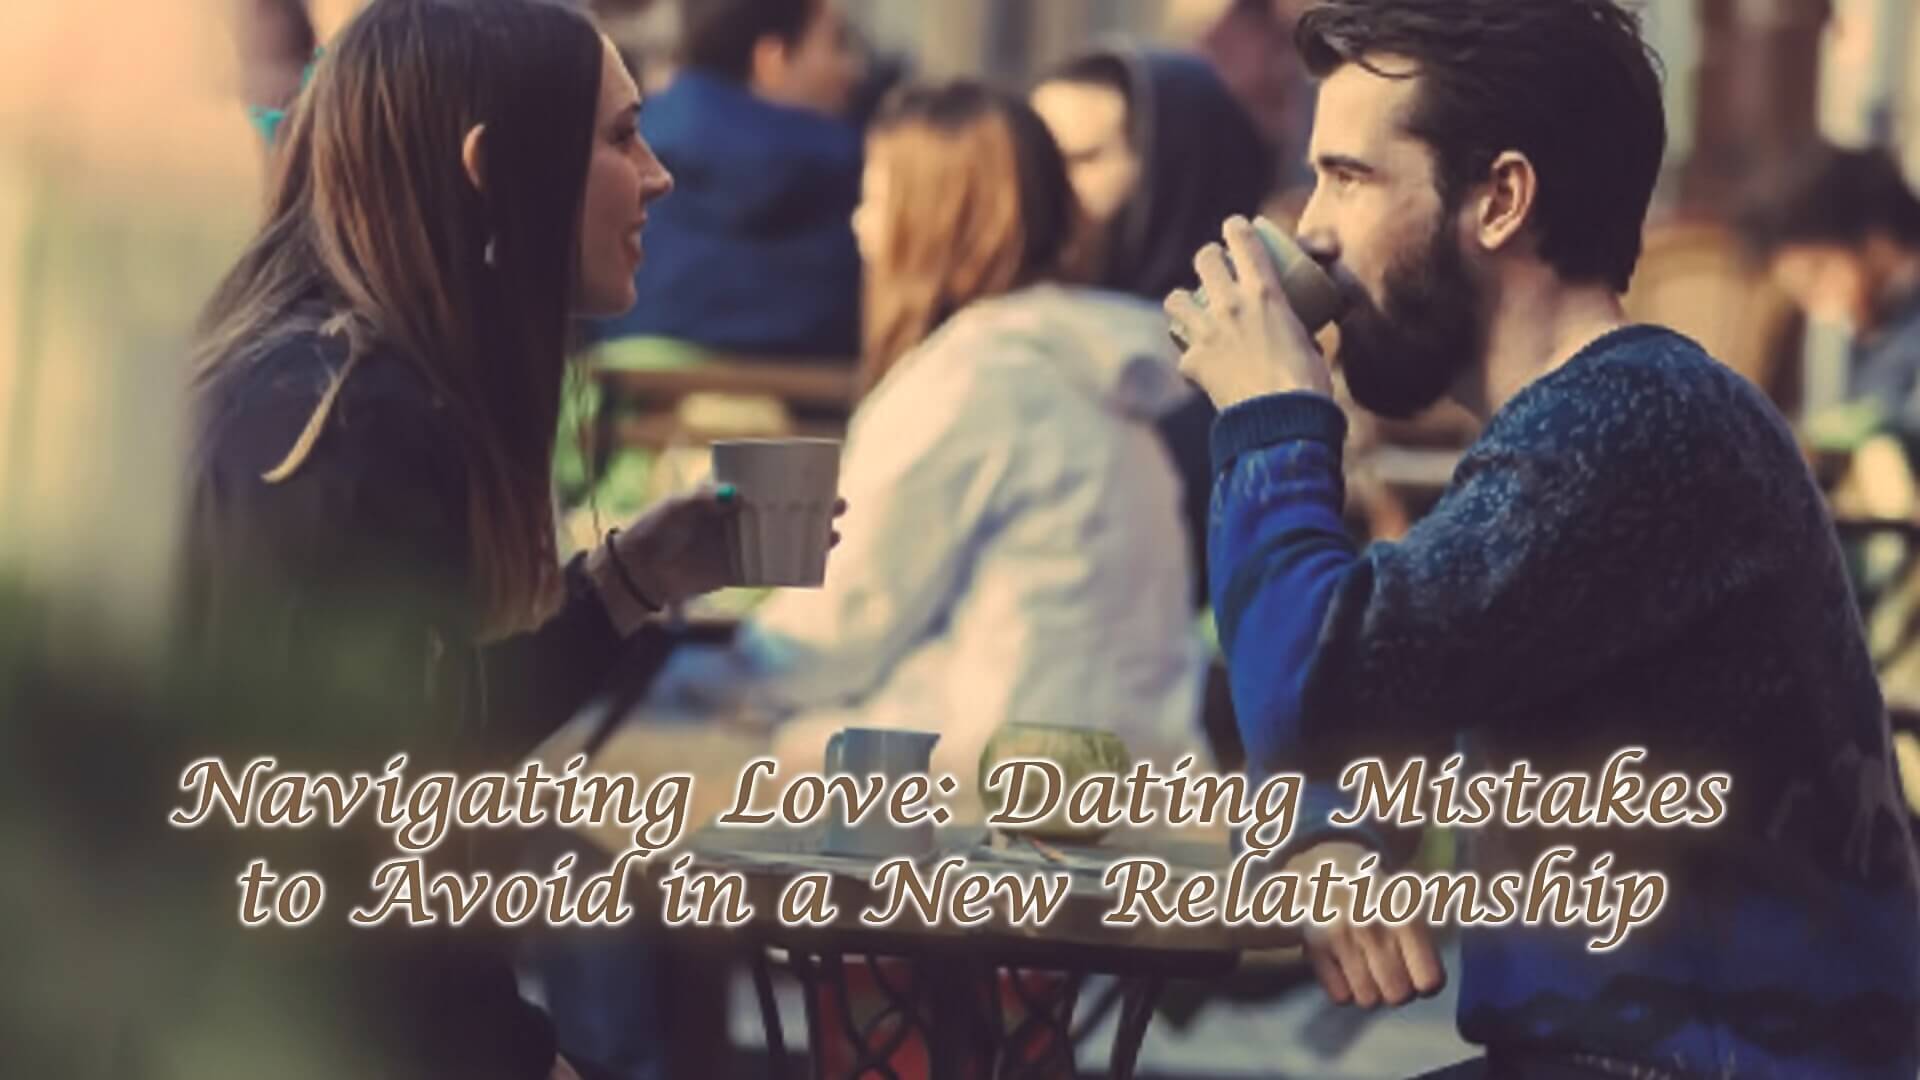 Navigating Love: Dating Mistakes to Avoid in a New Relationship